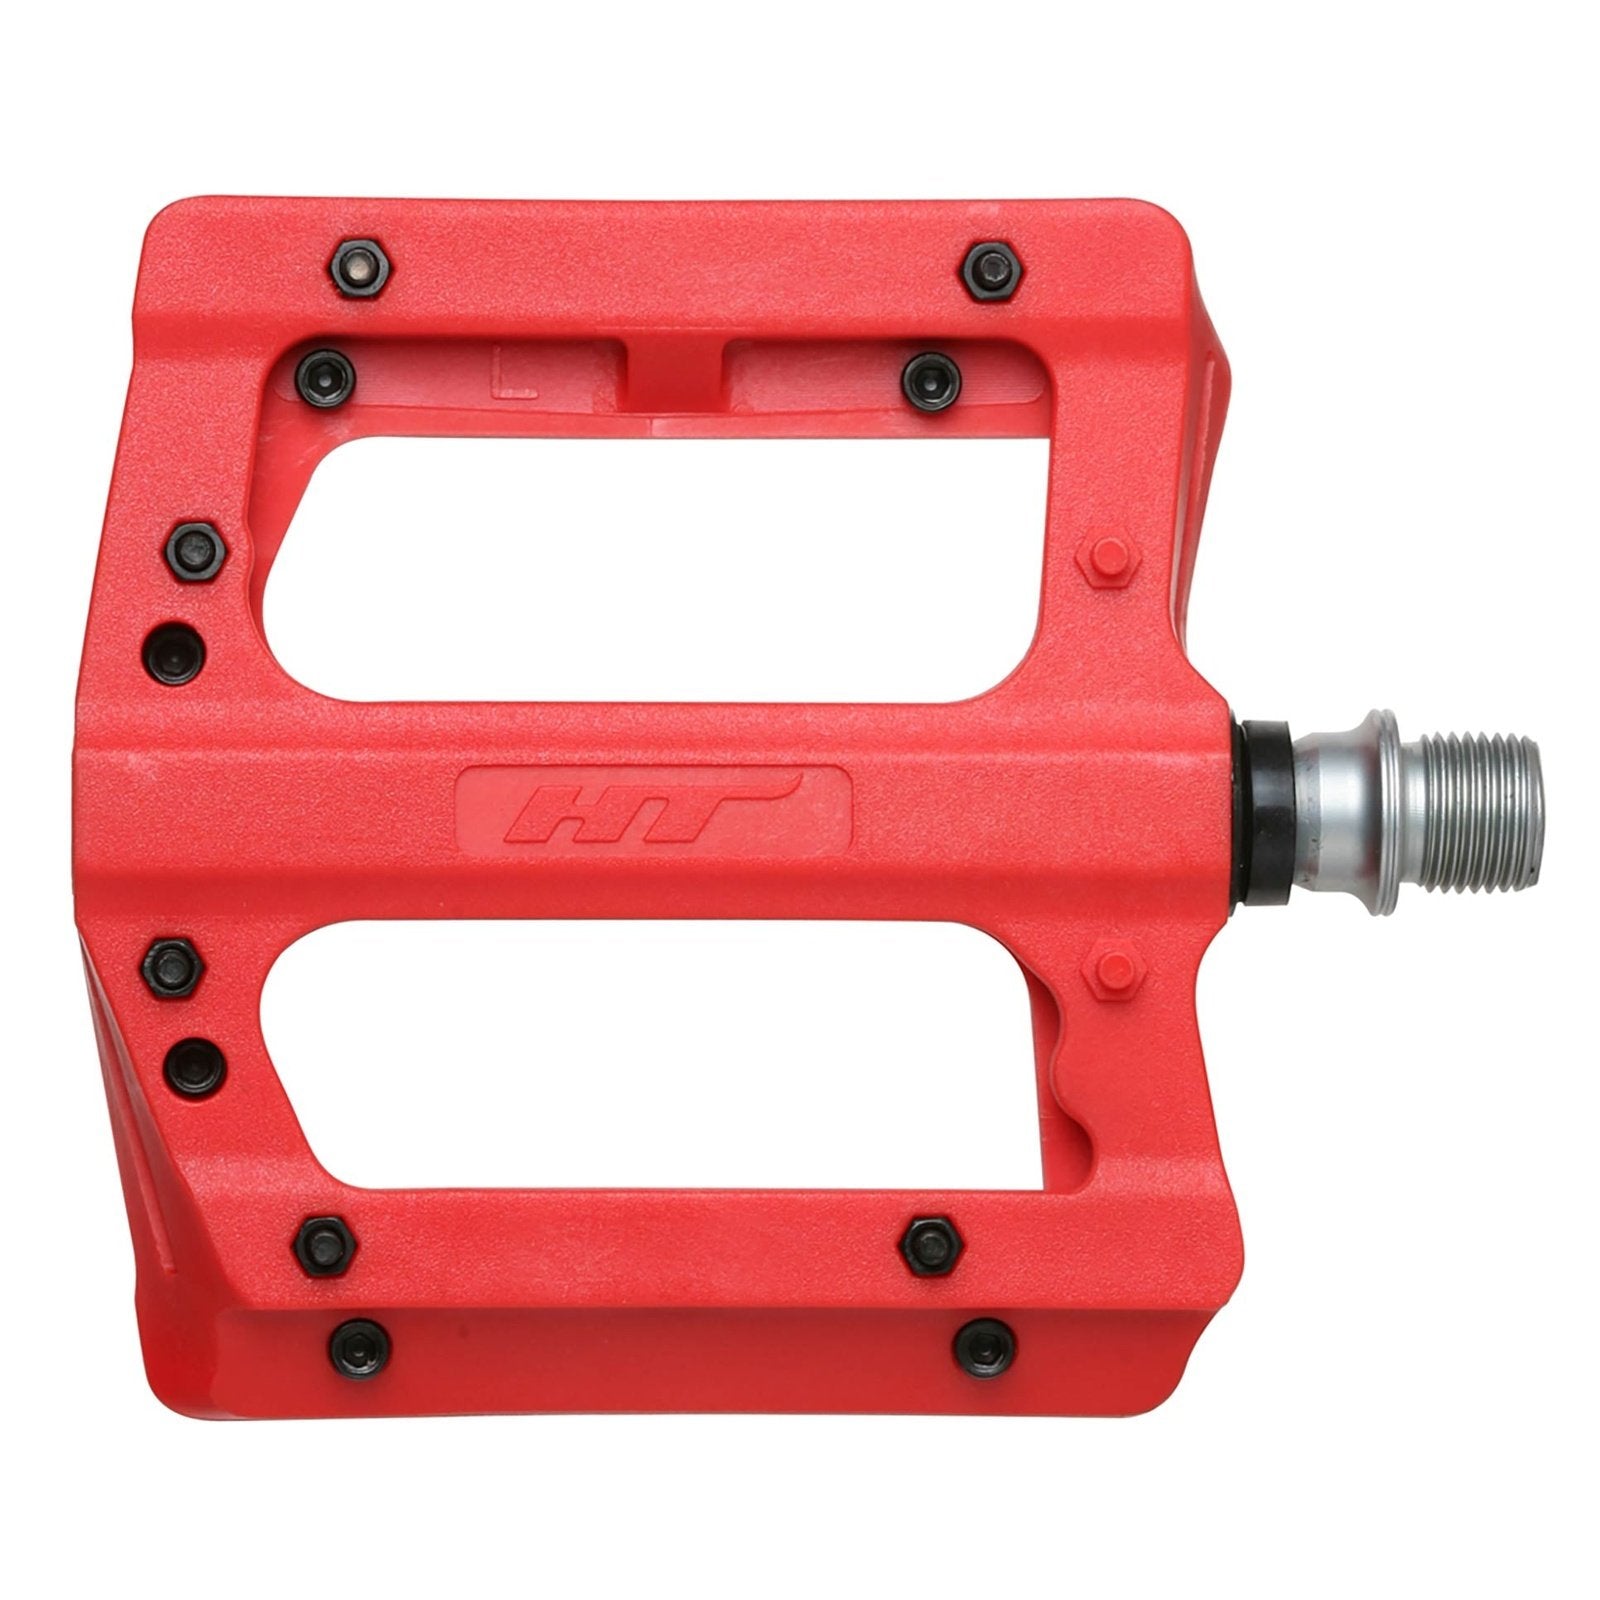 Ht PA12A Pedals Nylon / CNC CRMO - Red